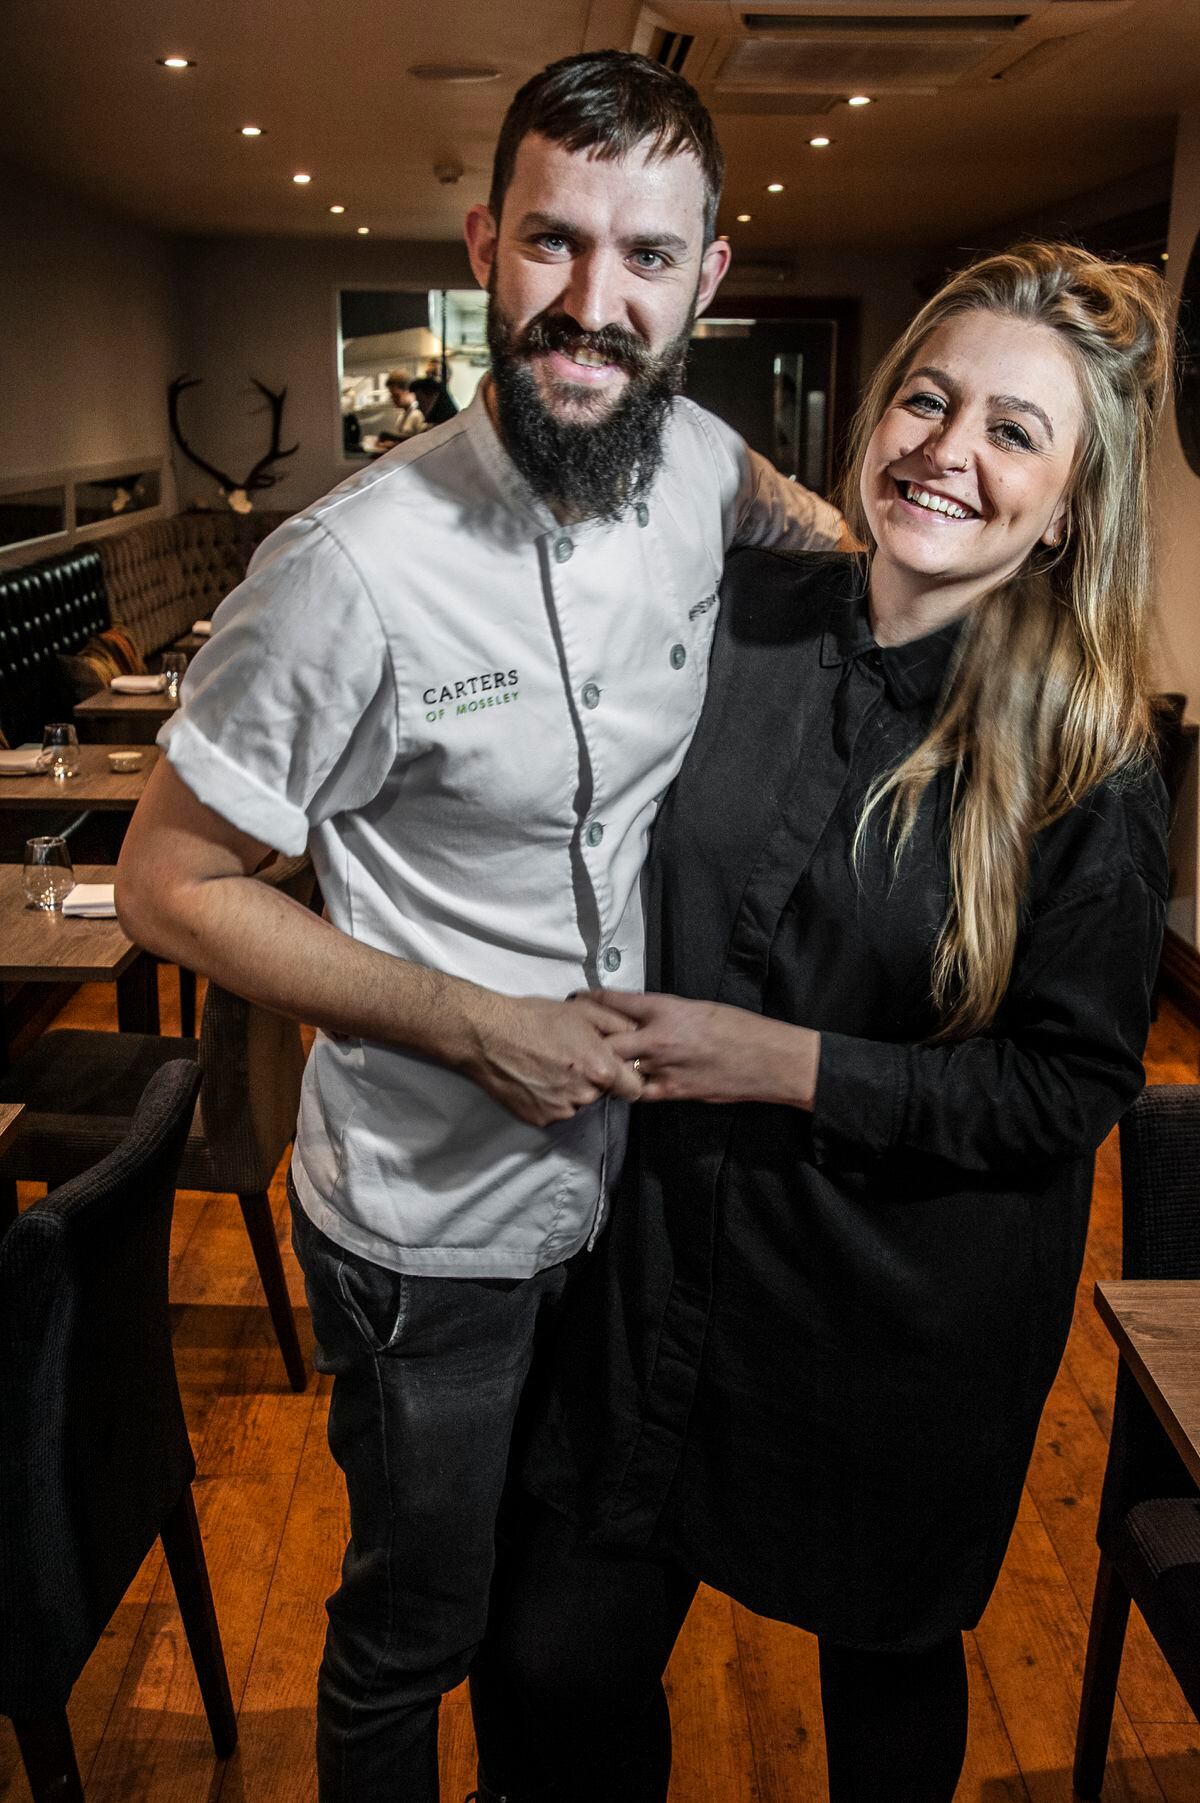 Brad Carter and Holly Jackson, from Carters of Moseley, are now selling Michelin-starred hampers